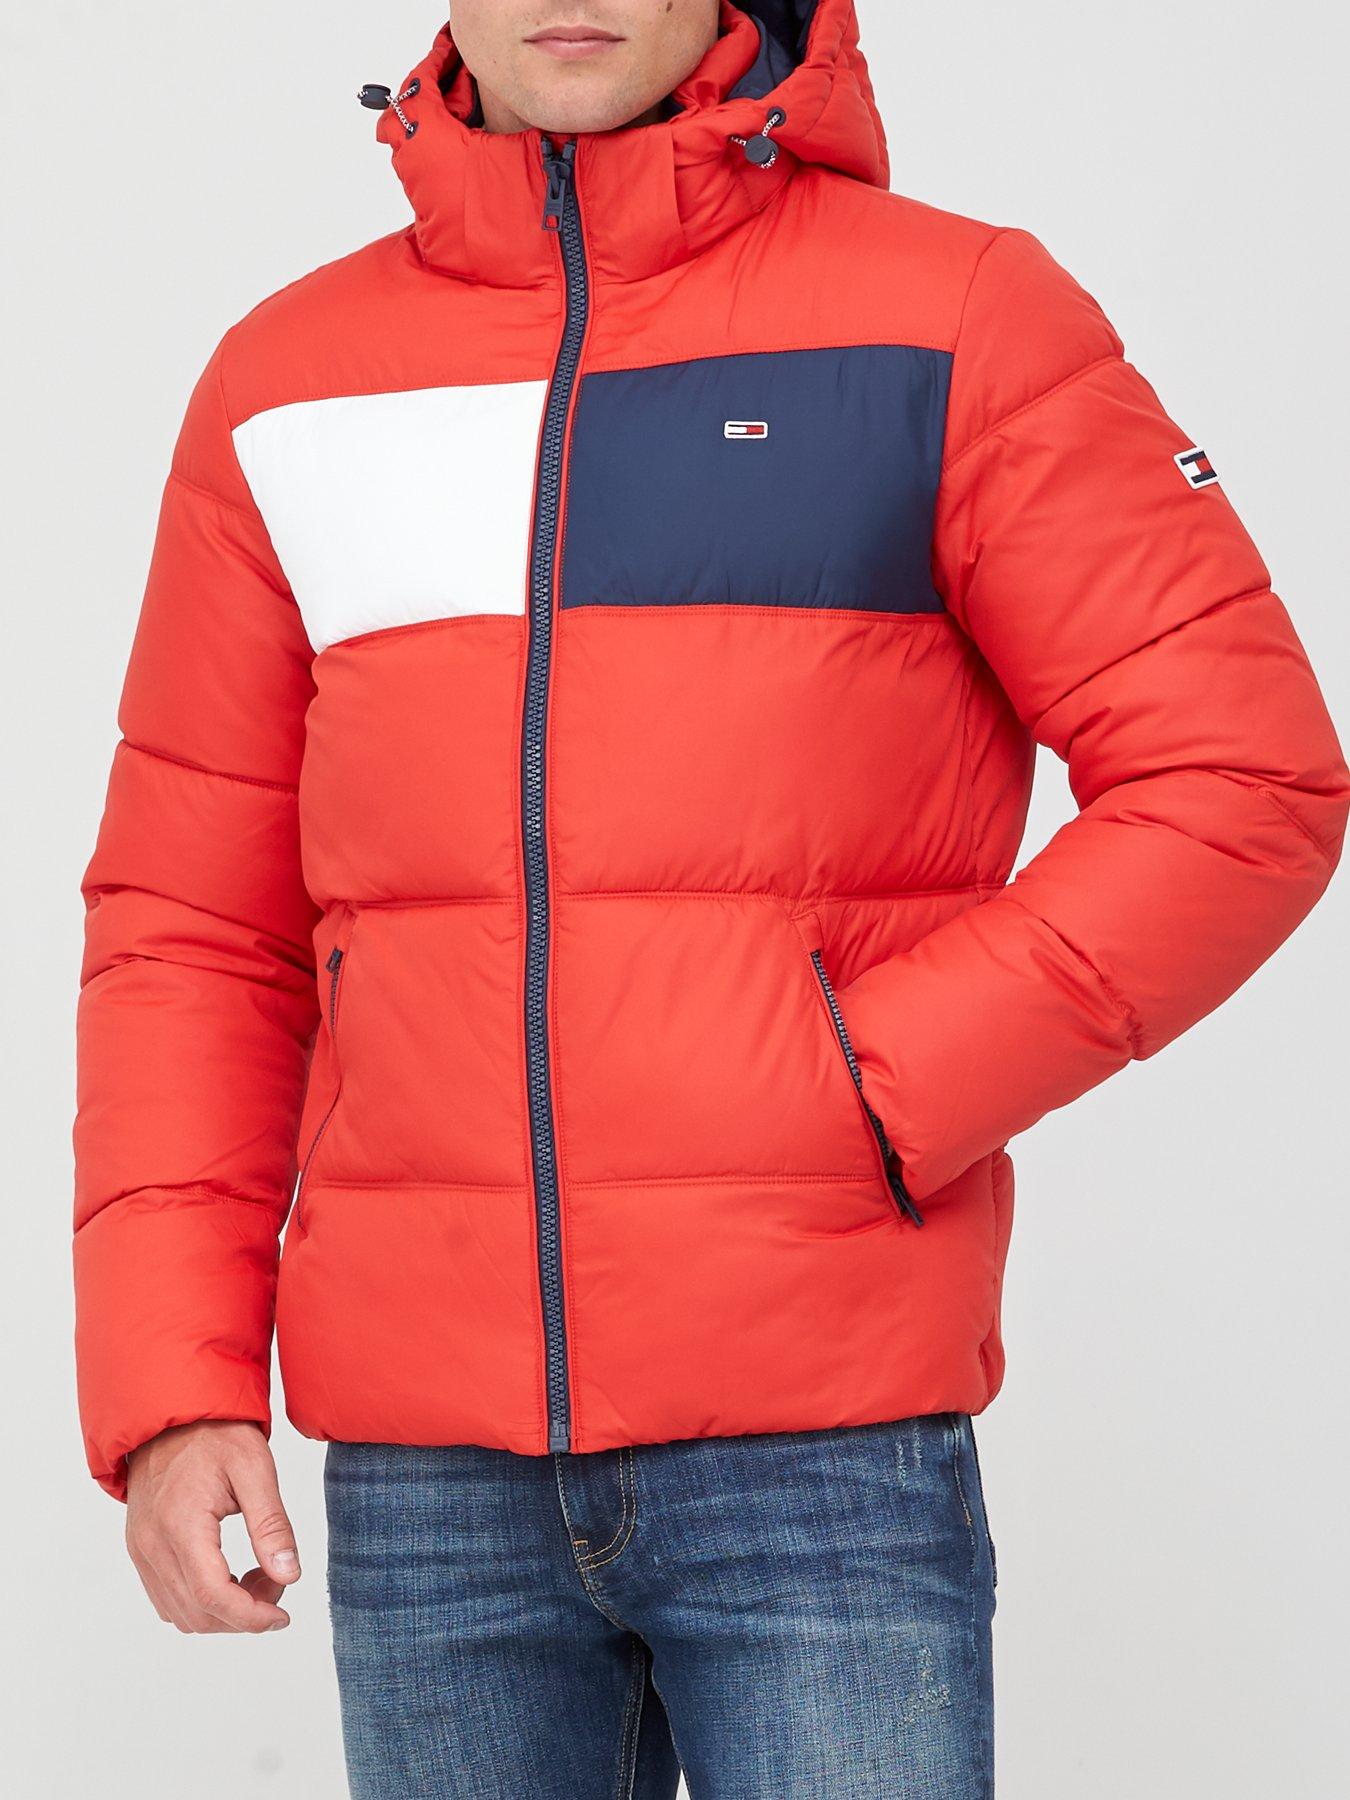 very tommy hilfiger coat